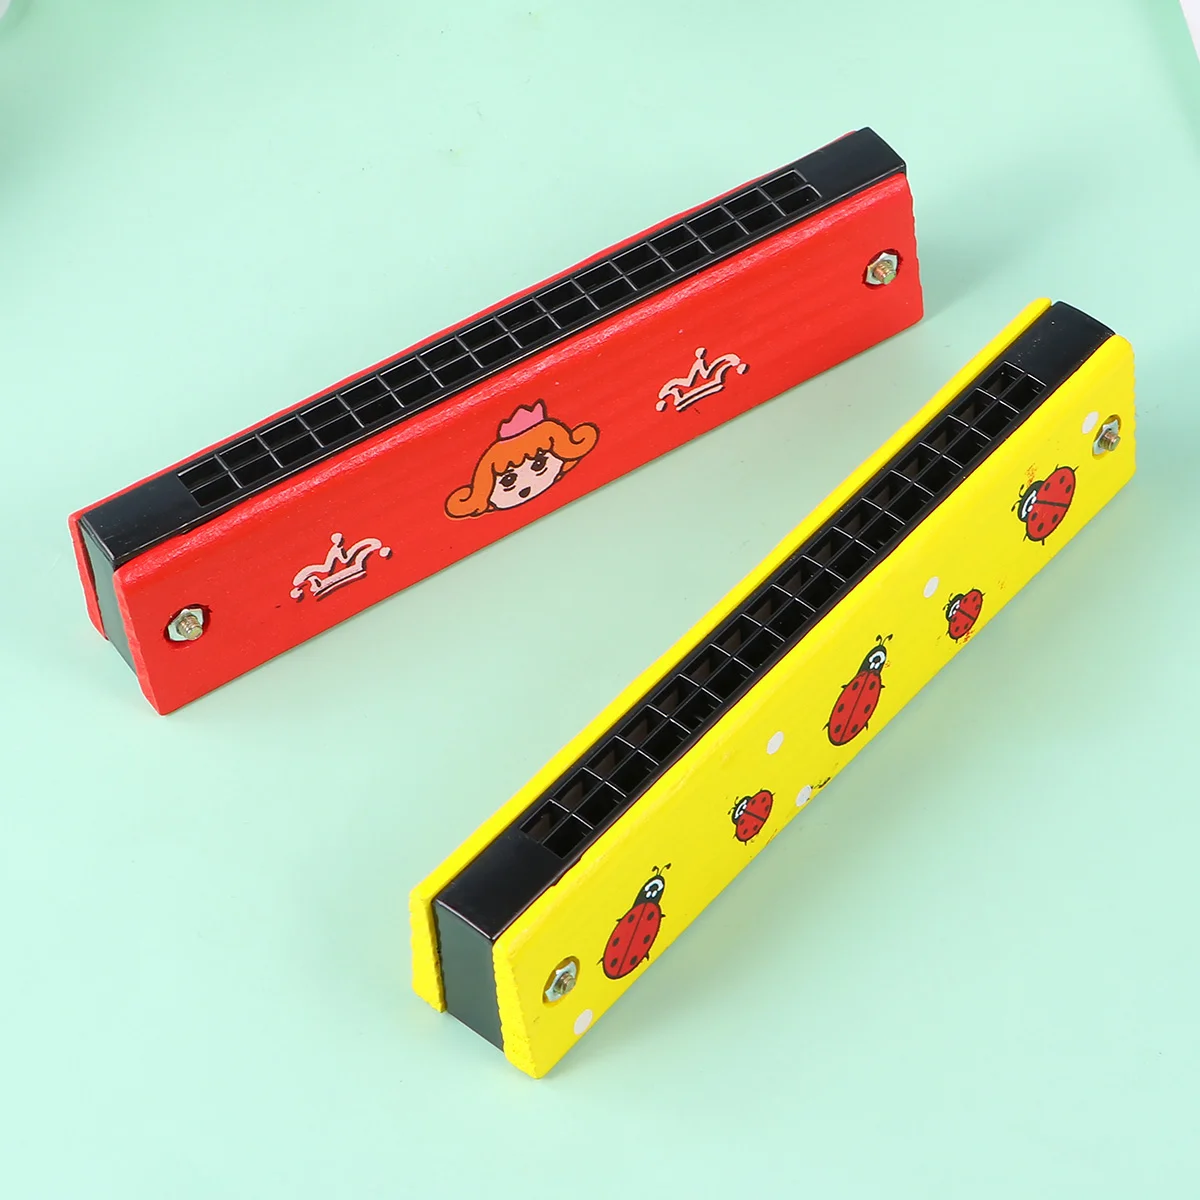 

Harmonica Mouth Key Hole Toy Blues Wooden Musical Instrument Instruments Kids Diatonic Harp Party Kid Blue Chromatic Educational